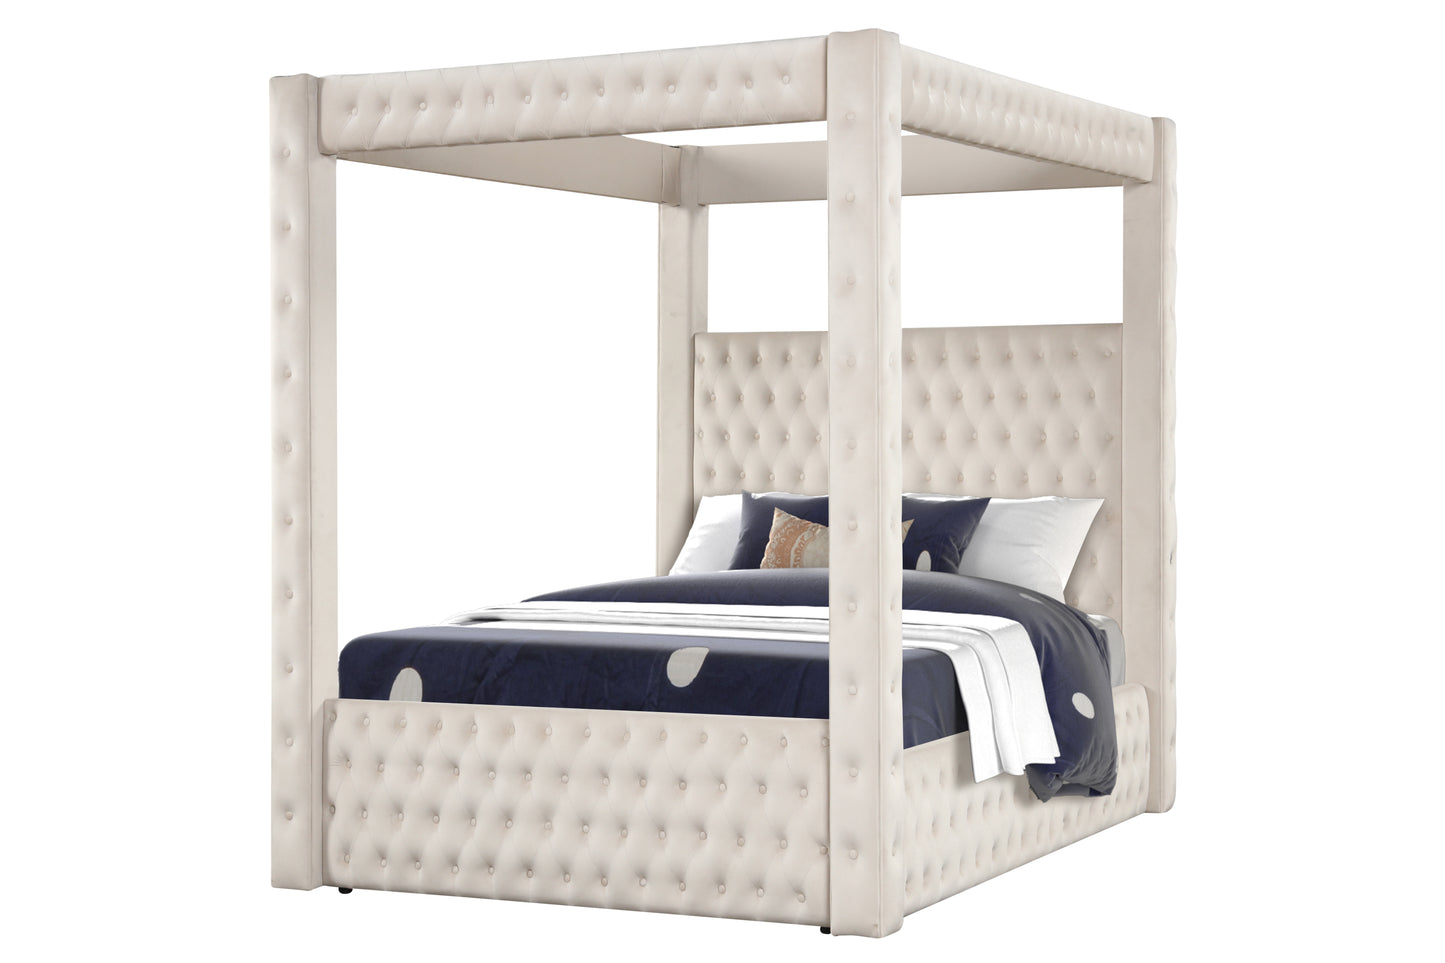 Monica luxurious Four-Poster Full 4 Pc Bed Made with Wood in Cream